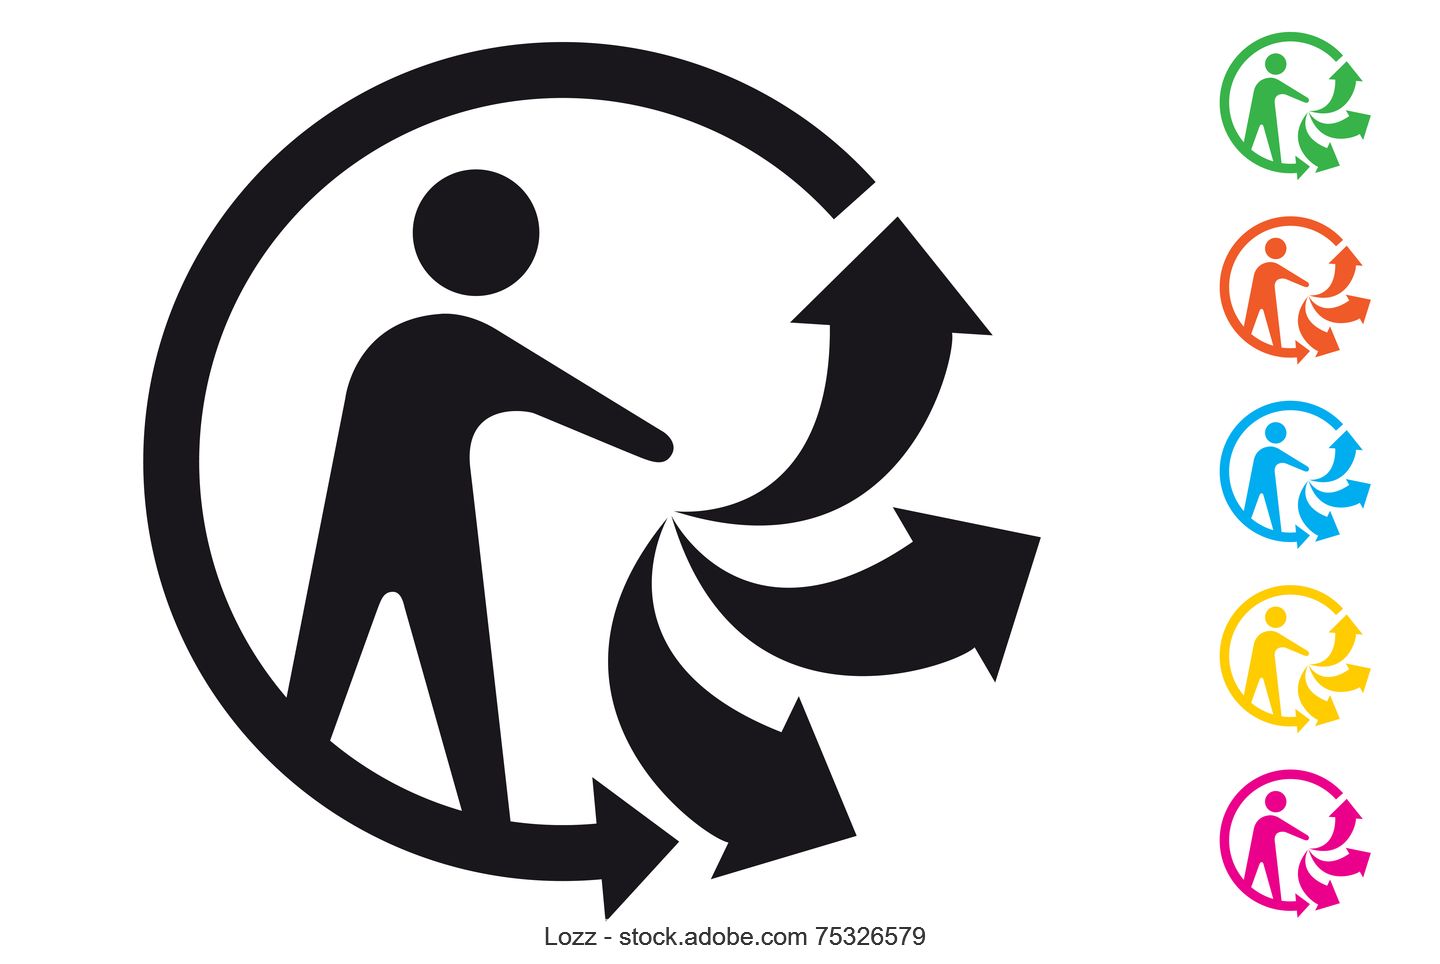 France's Triman "sorting man" recyclability symbol